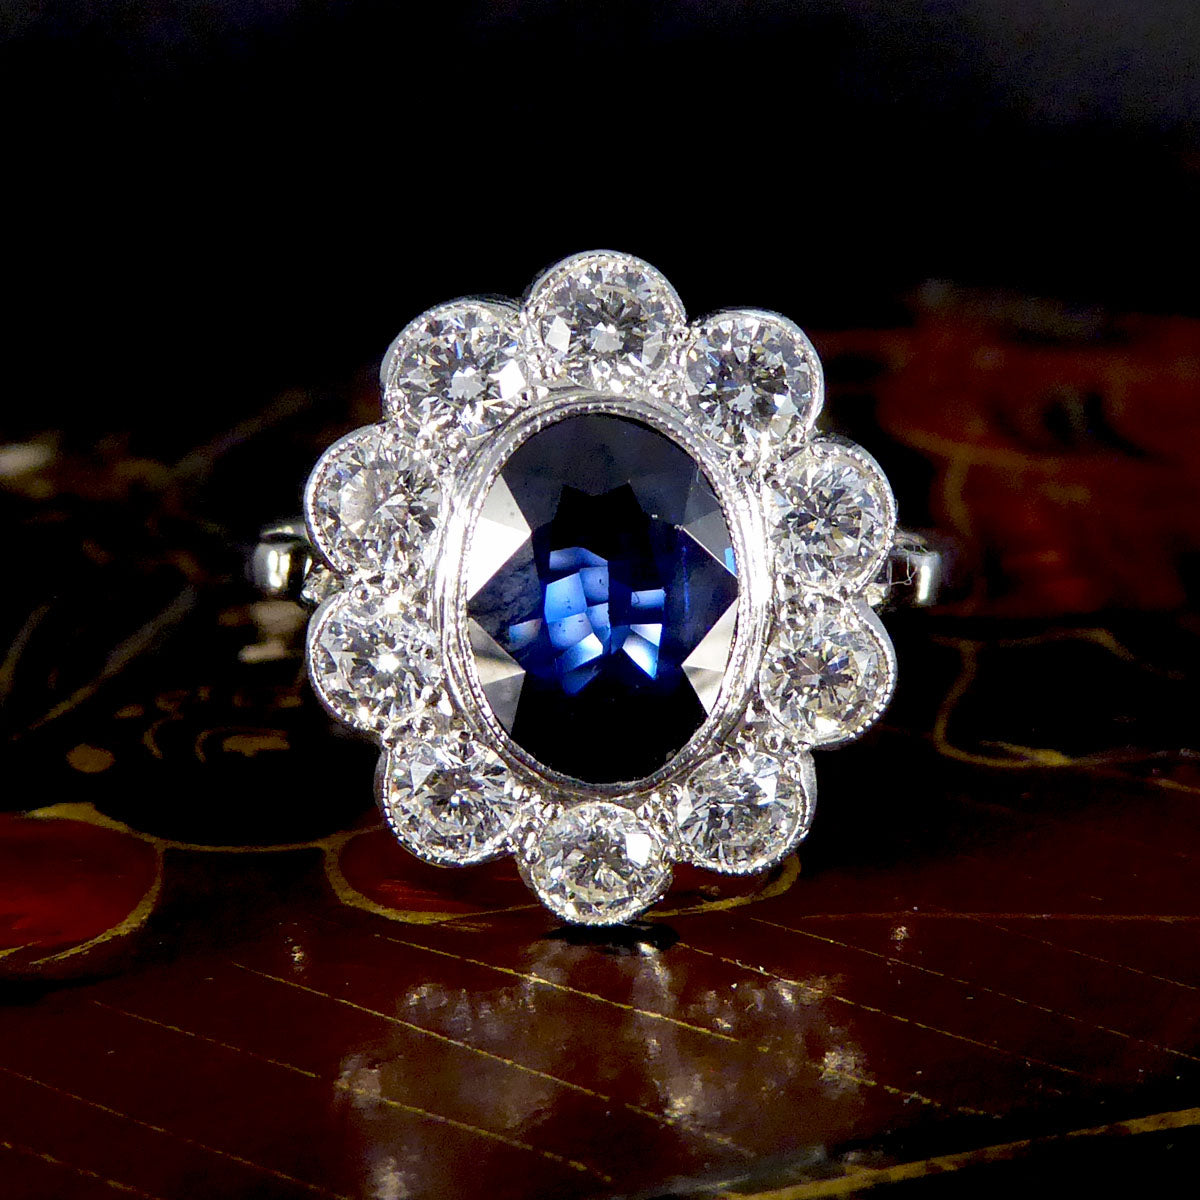 2.07ct Sapphire and 0.95ct Total Diamond Cluster Ring in Platinum